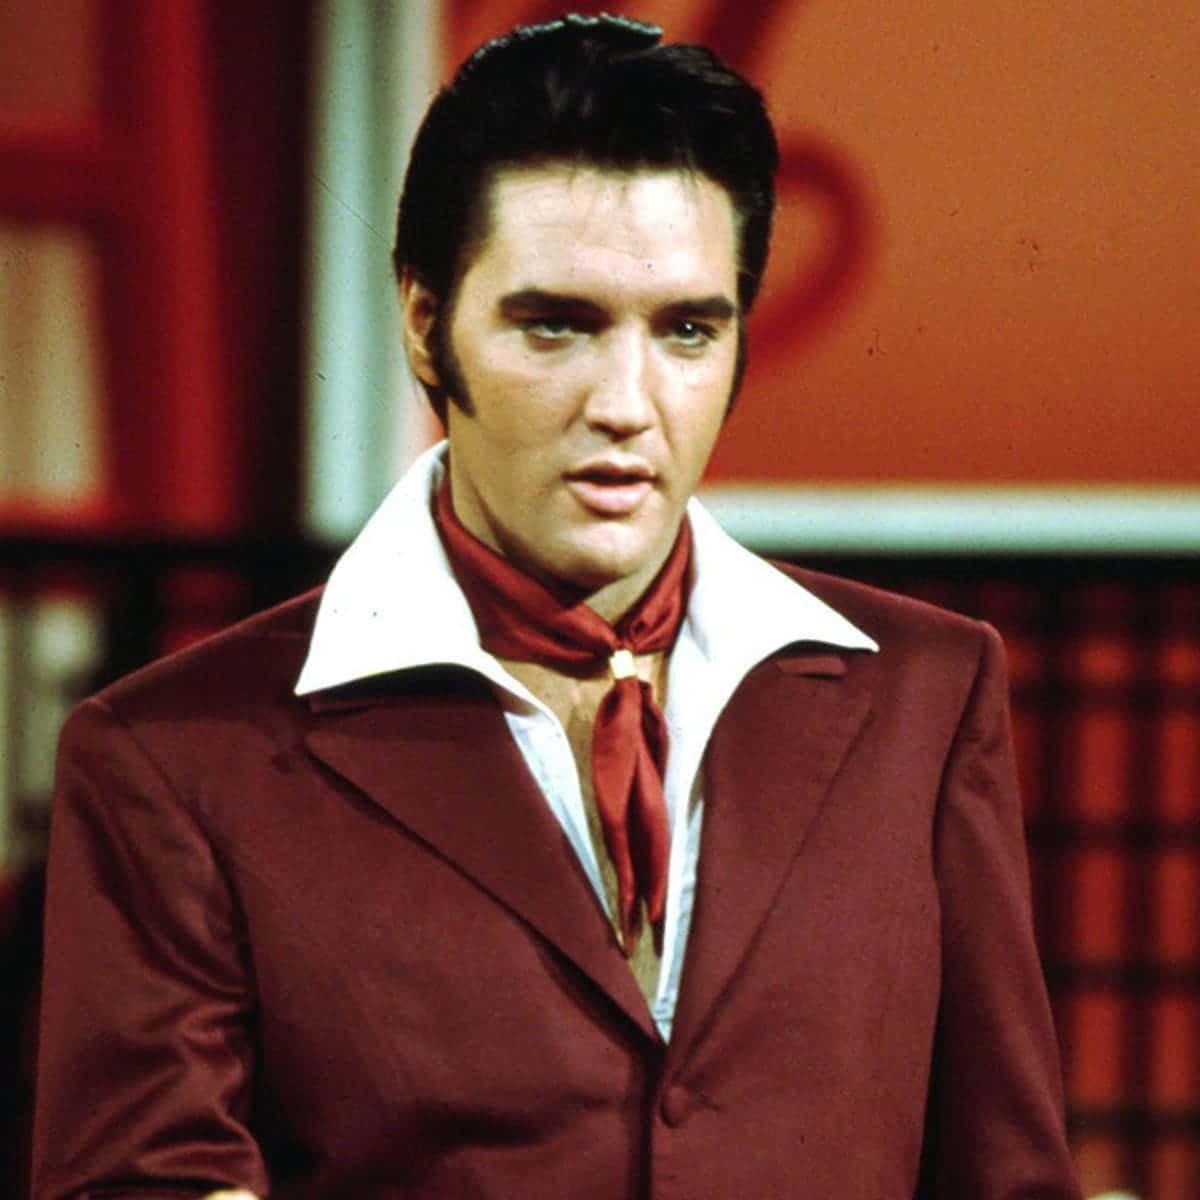 Elvis Presley on Stage During a Performance